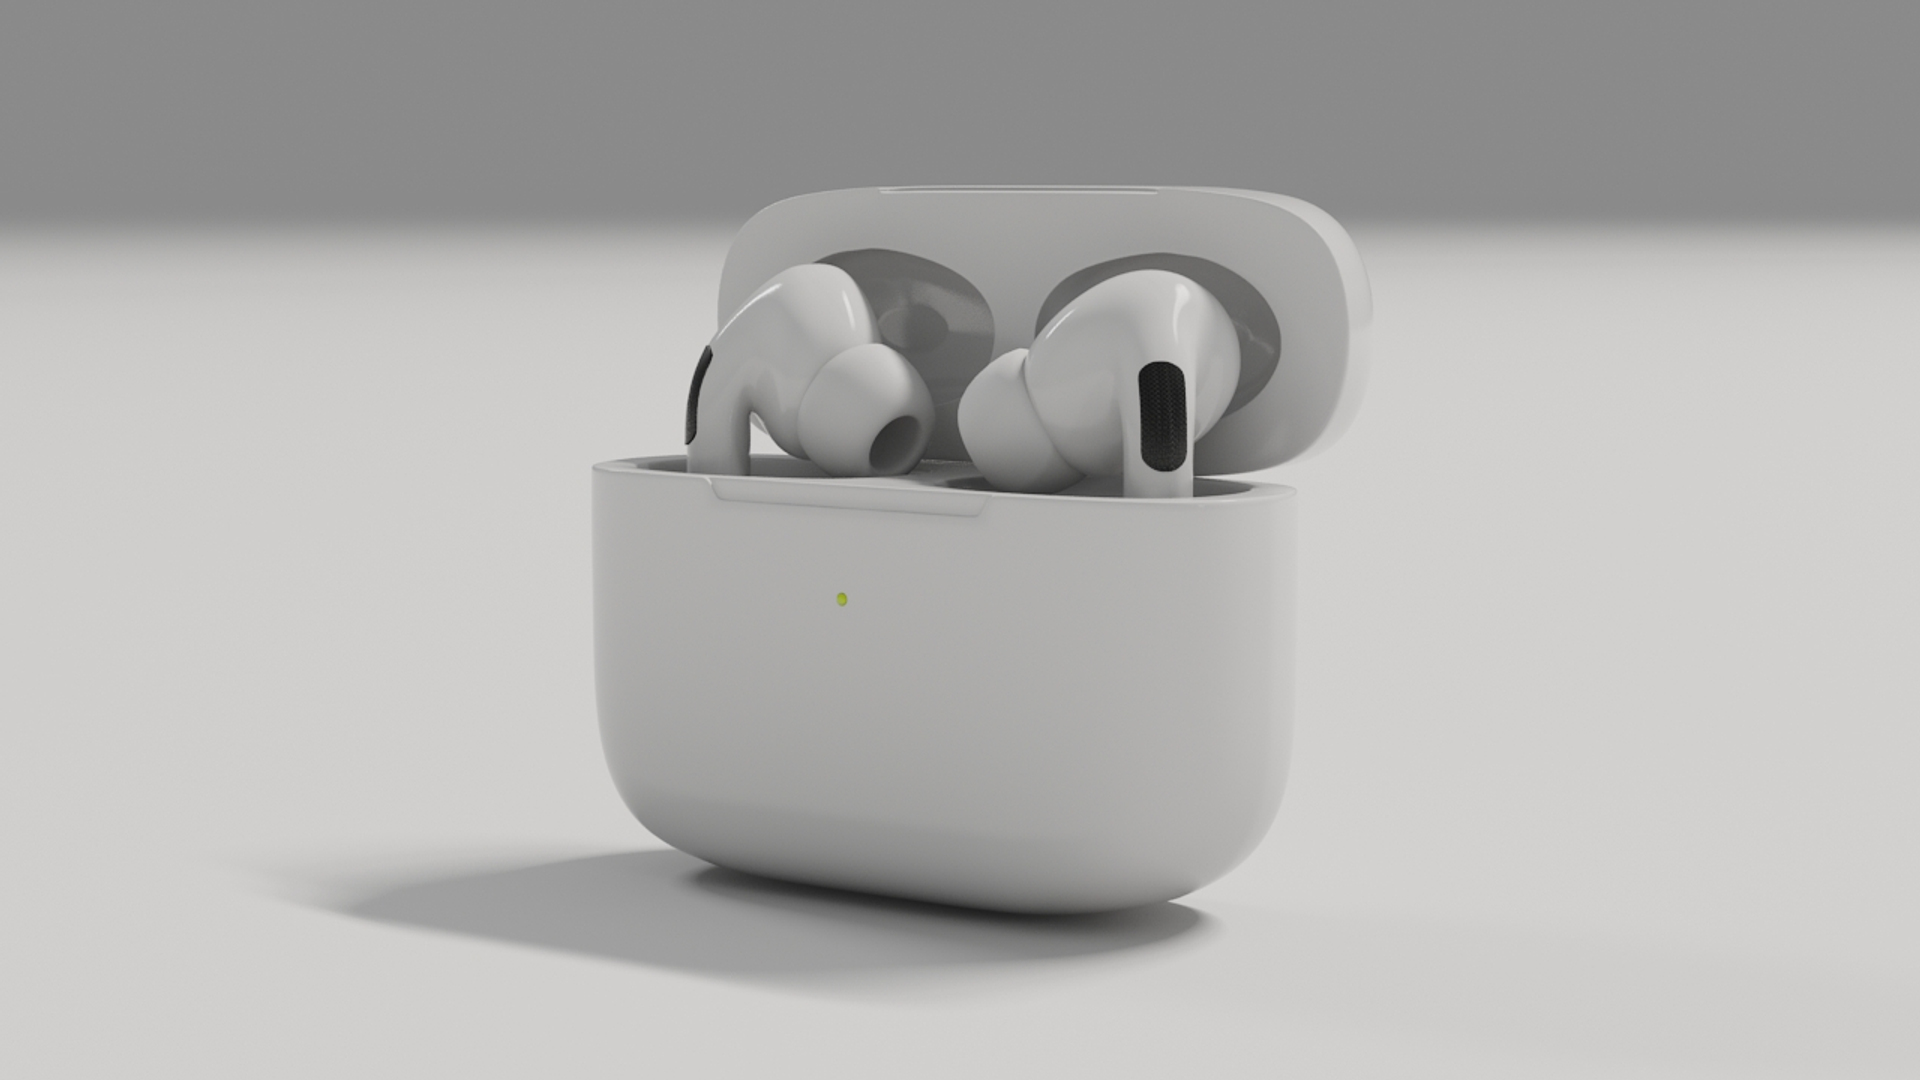 Air pods 3 apple. AIRPODS Pro 3. Air pods 3 и AIRPODS Pro. Apple Earpods 3 Pro. Правый наушник Apple AIRPODS Pro.